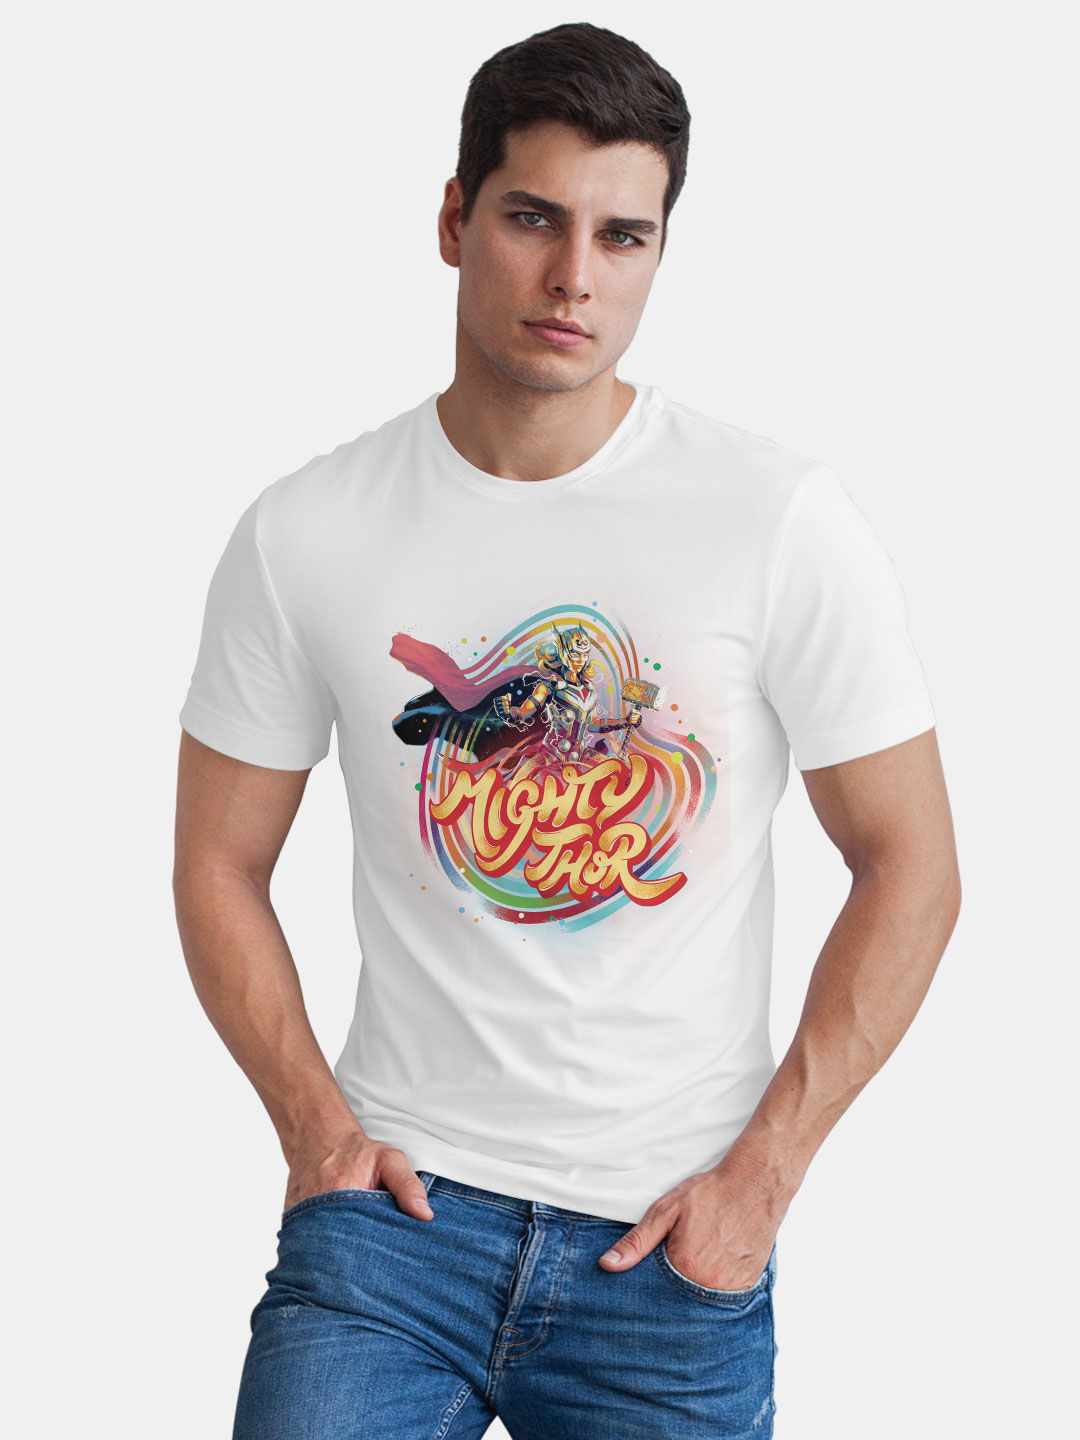 Buy Bifrost Mighty Thor - Male Designer T-Shirts T-Shirts Online